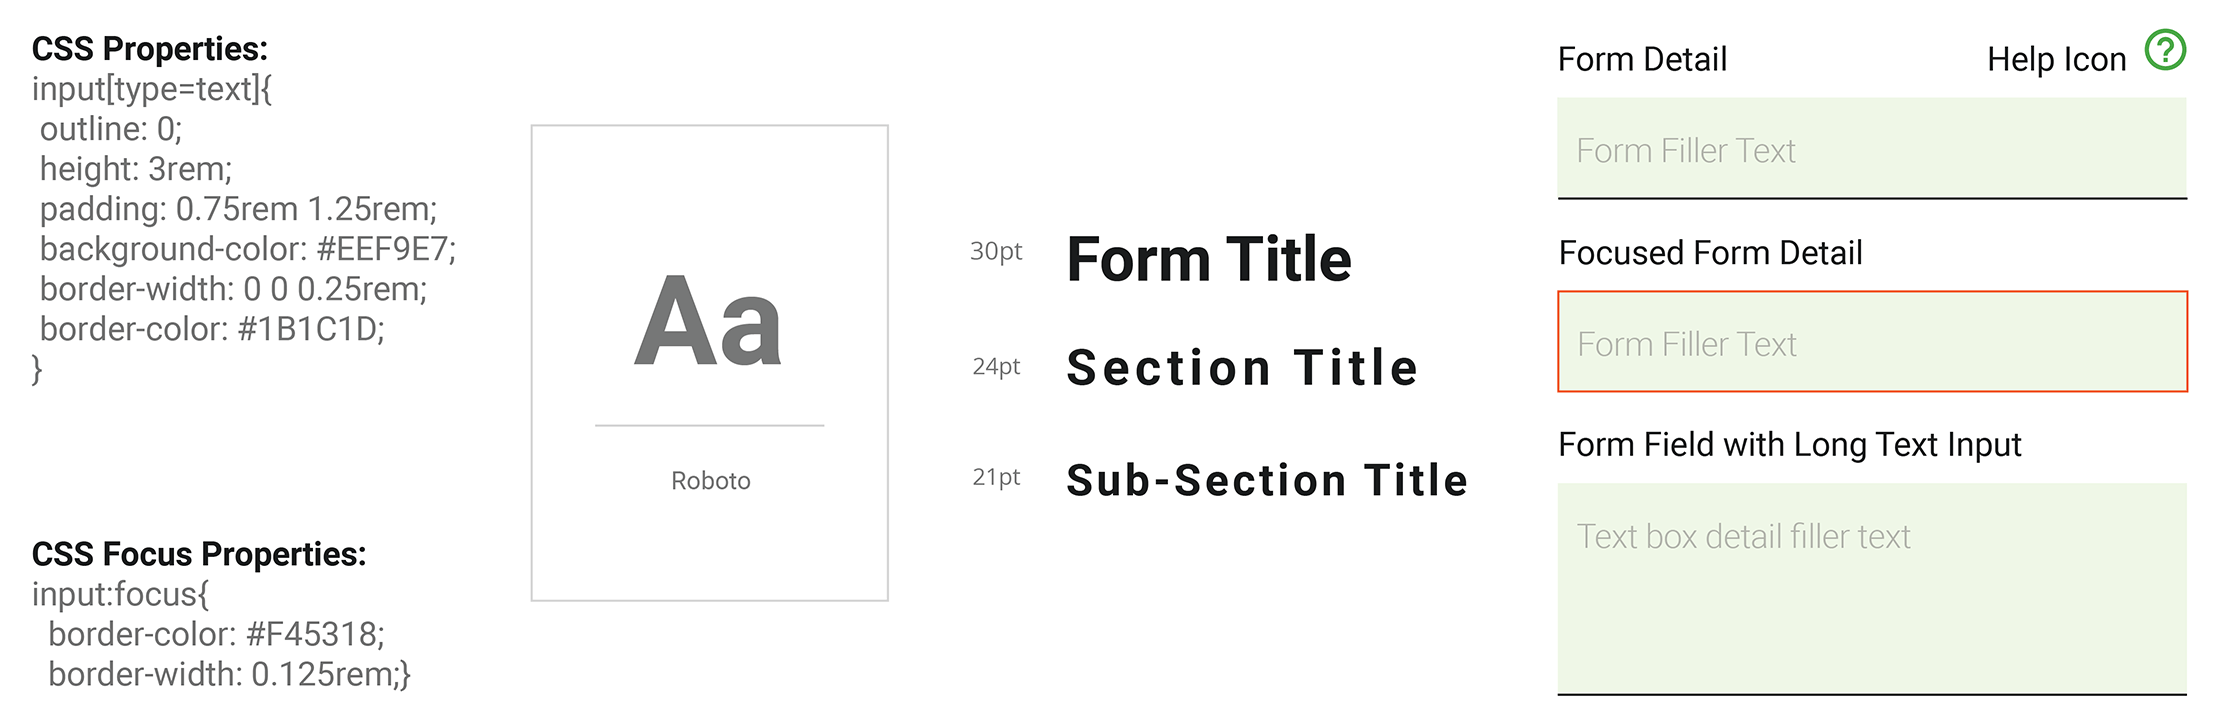 The design and CSS properties of the forms and associated type